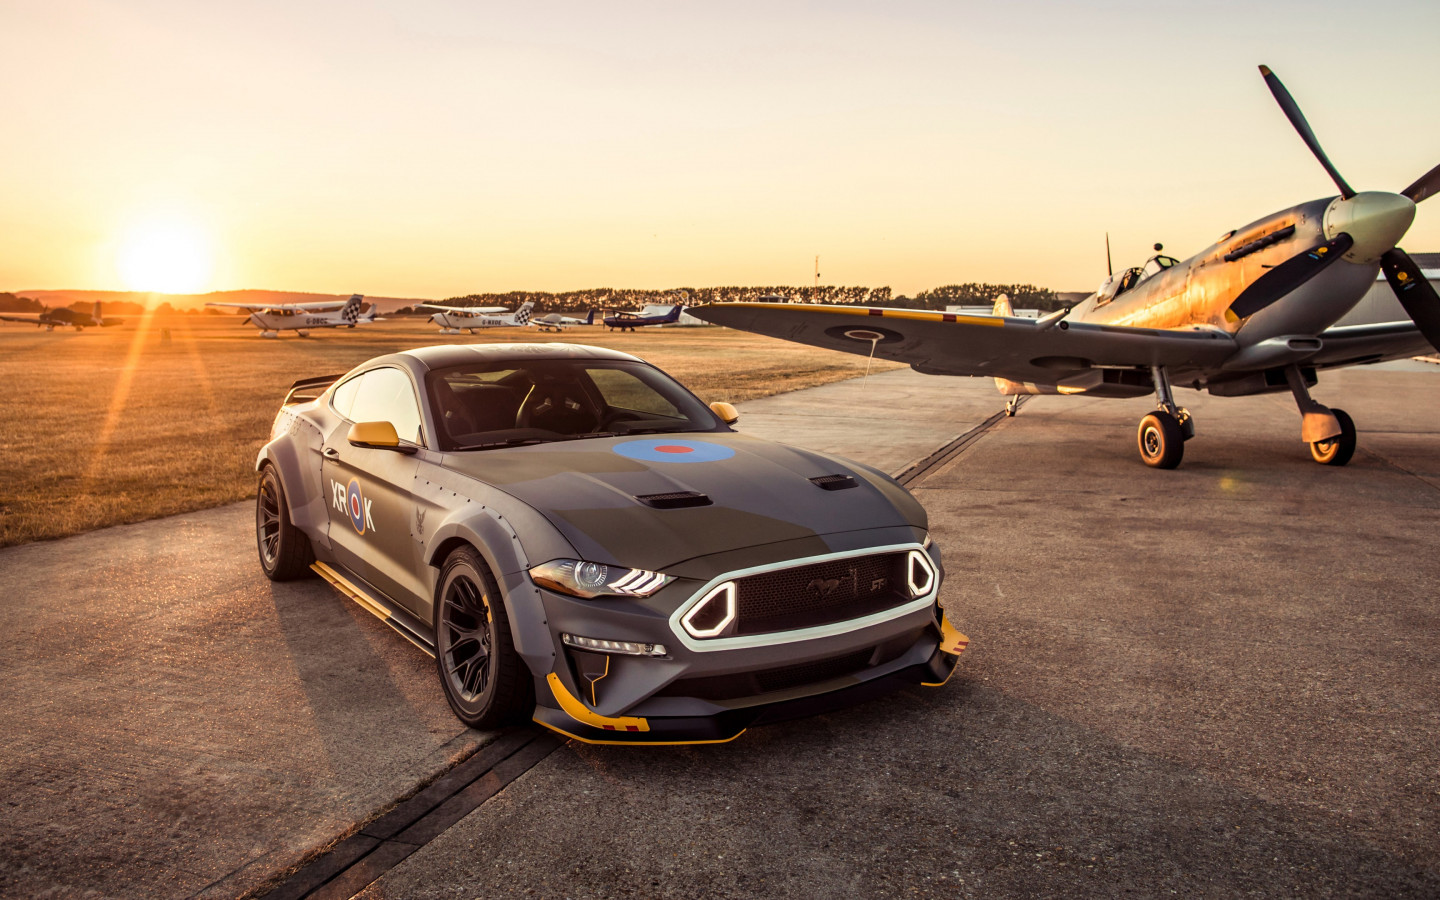 Ford Eagle Squadron Mustang GT wallpaper 1440x900